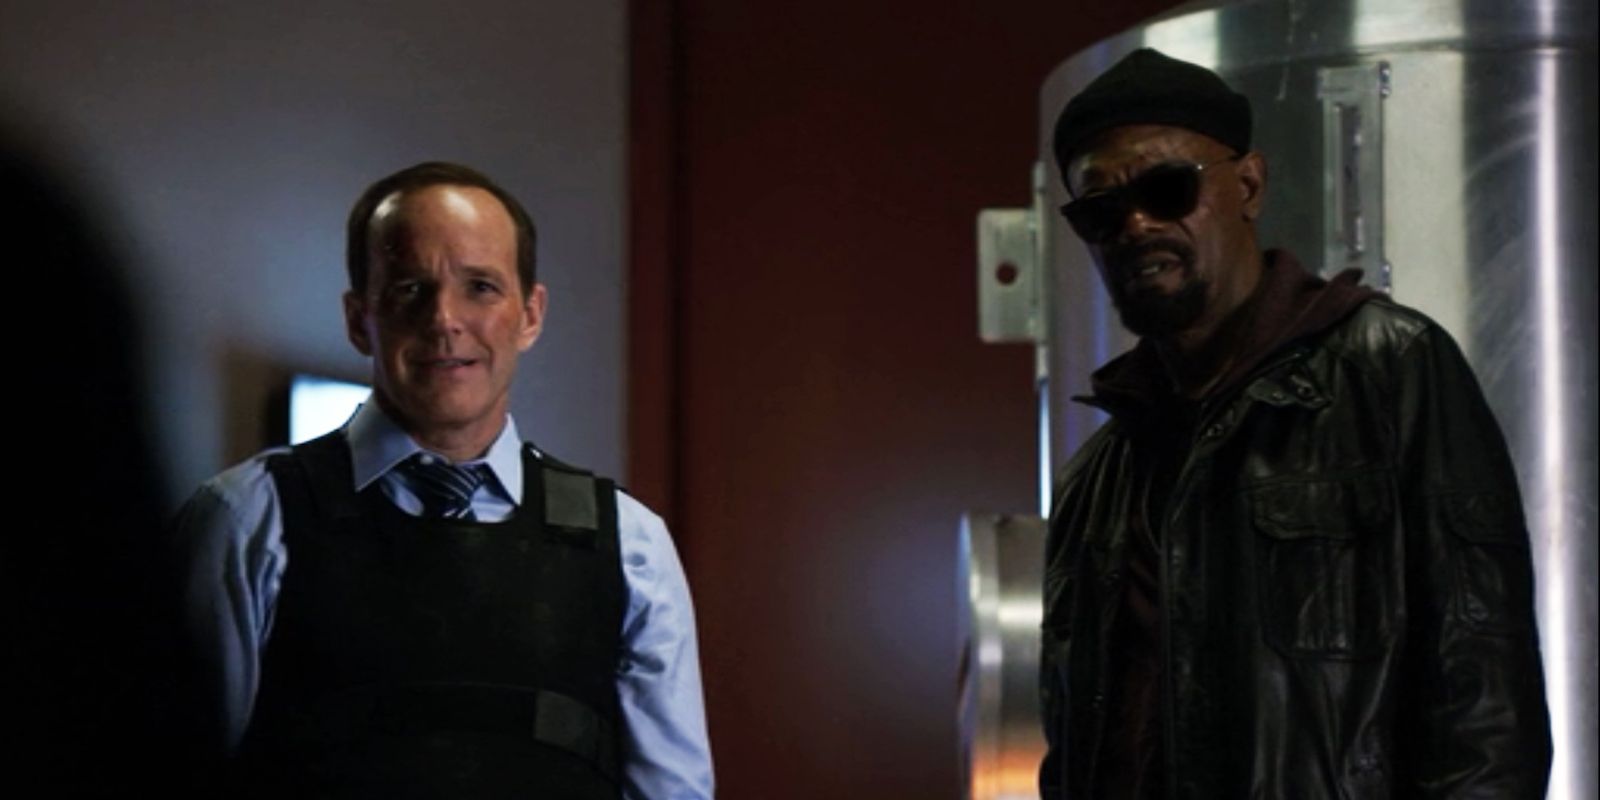 Nick Fury and Agent Coulson stand together in Agents of S.H.I.E.L.D.